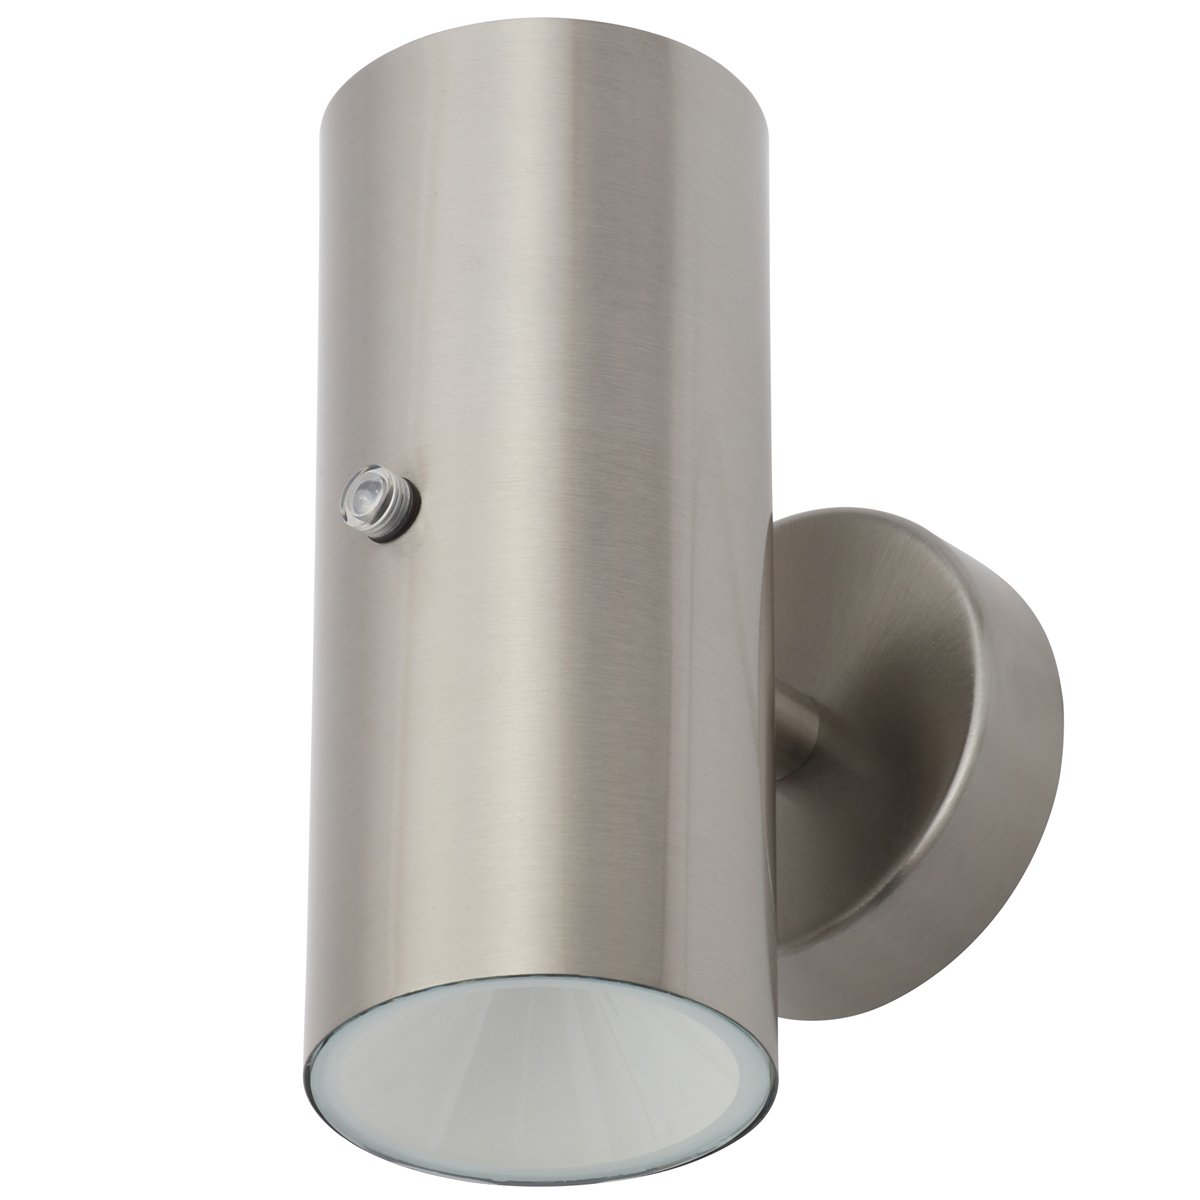 CGC VERITY Stainless Steel LED Outdoor Wall Spotlight With Photocell Sensor